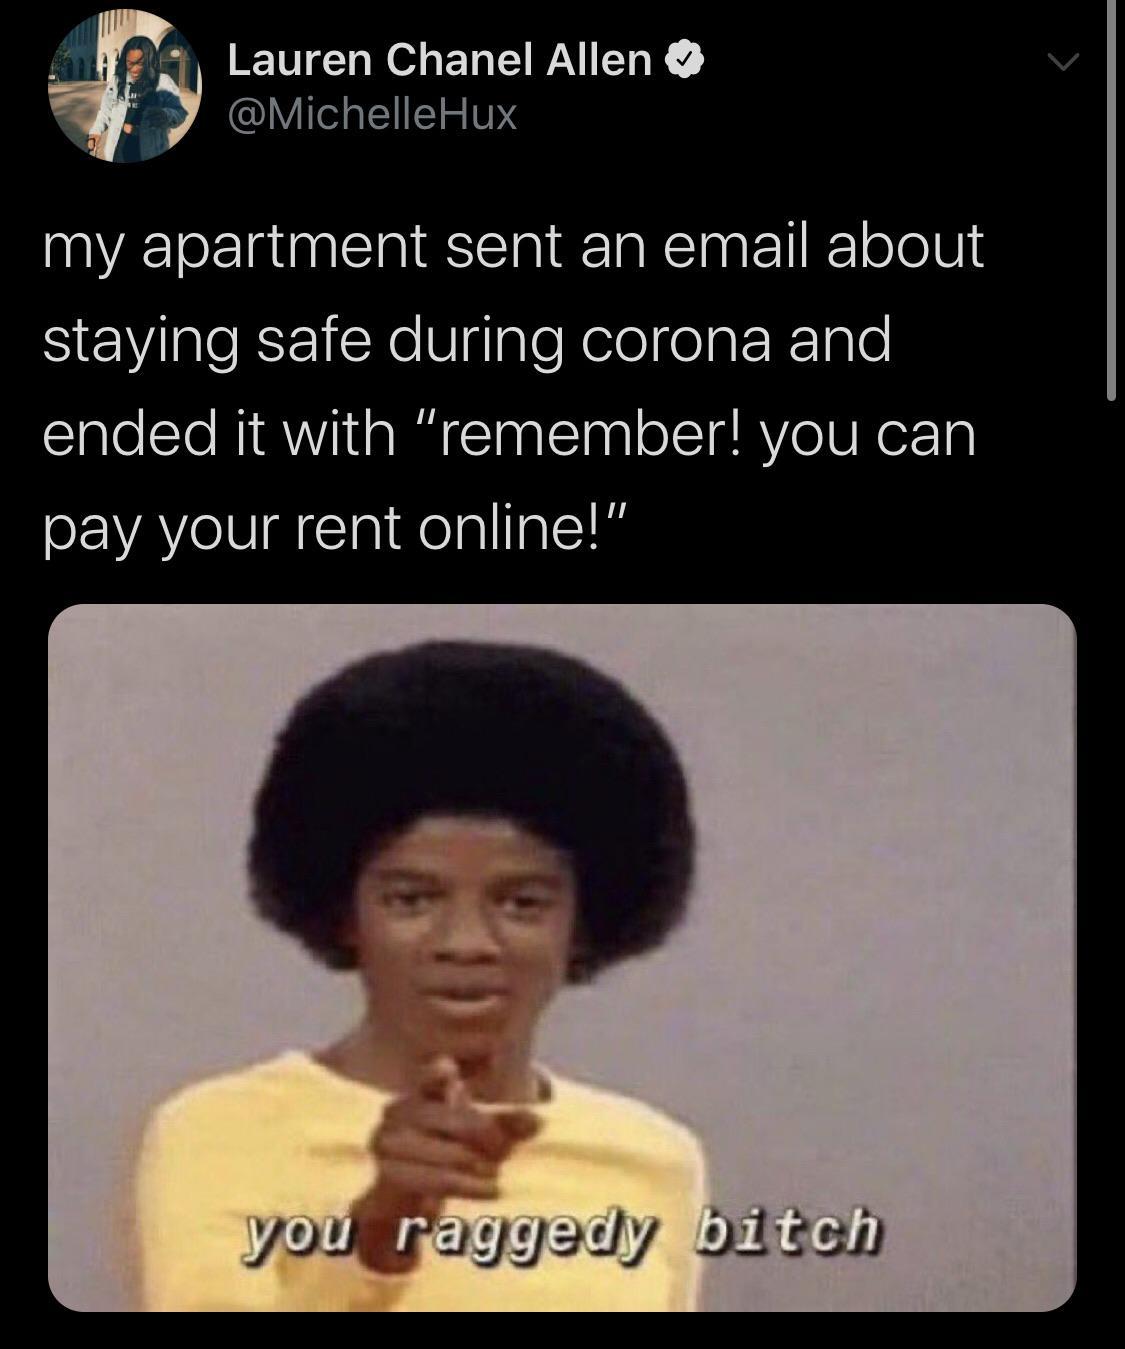 Prayer - Lauren Chanel Allen my apartment sent an email about staying safe during corona and ended it with "remember! you can pay your rent online!" you raggedy bitch